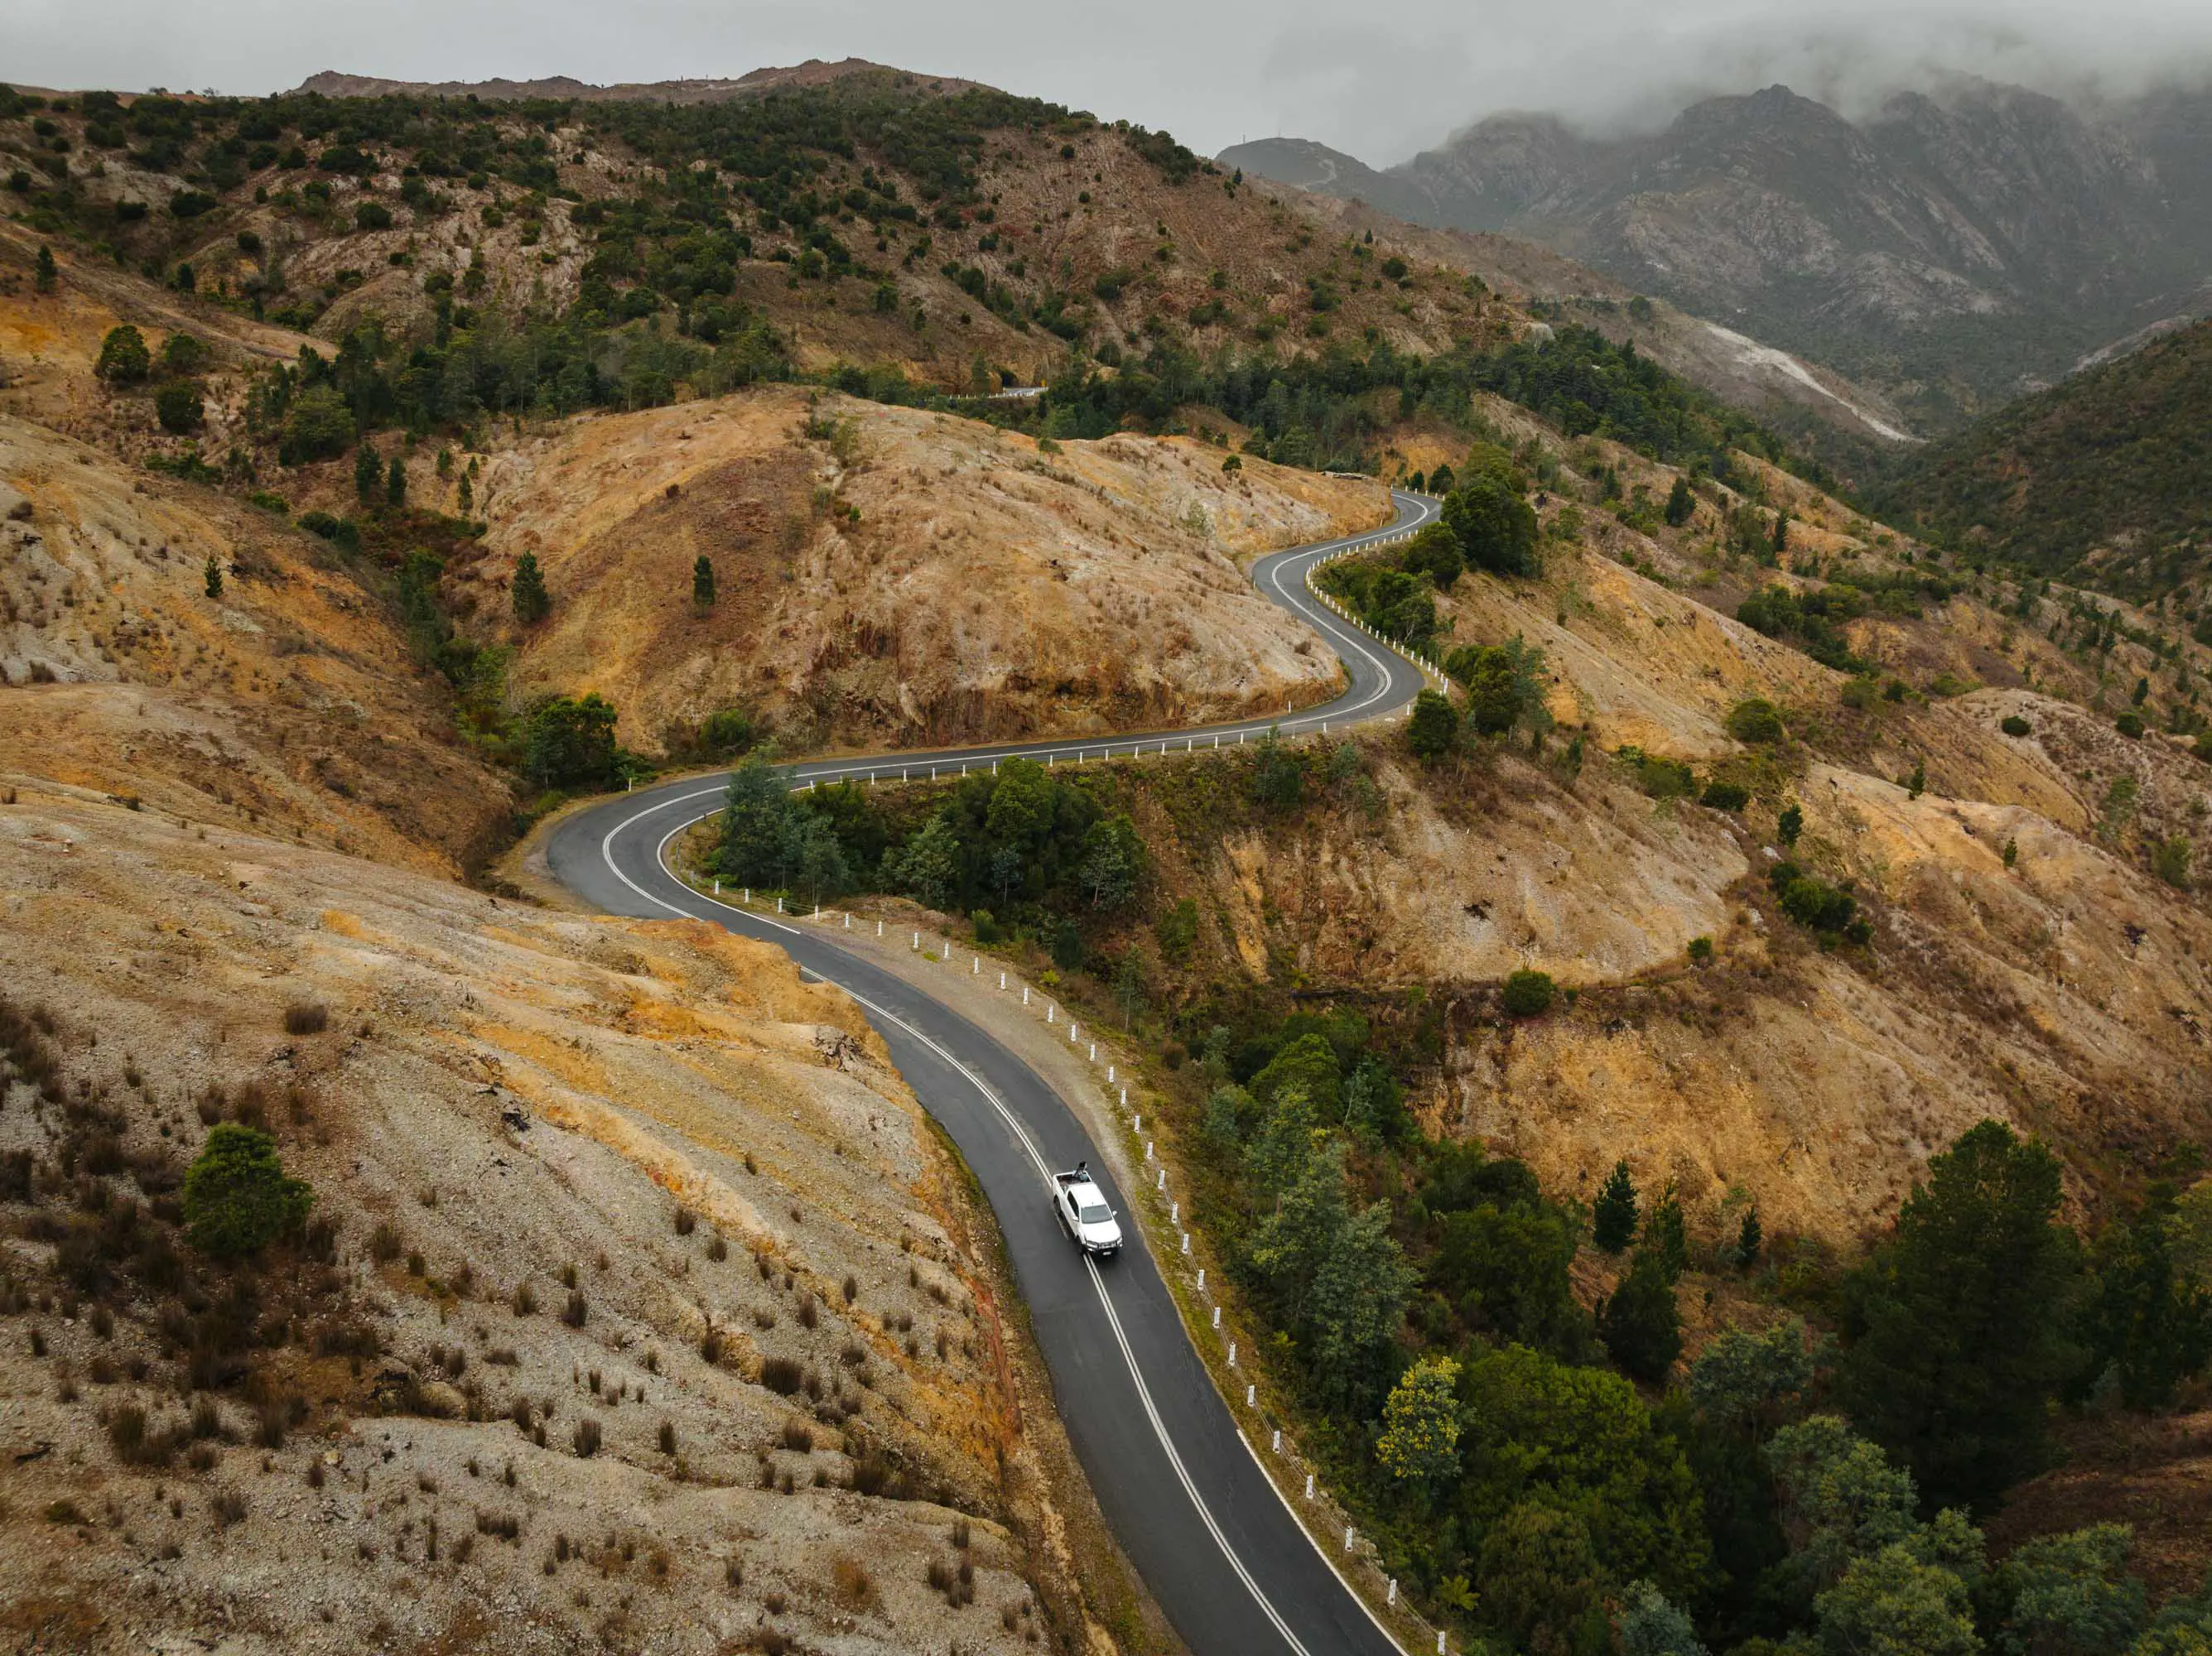 A white vehicle travels along a winding road through ochre-coloured mountain ranges on an overcast day.